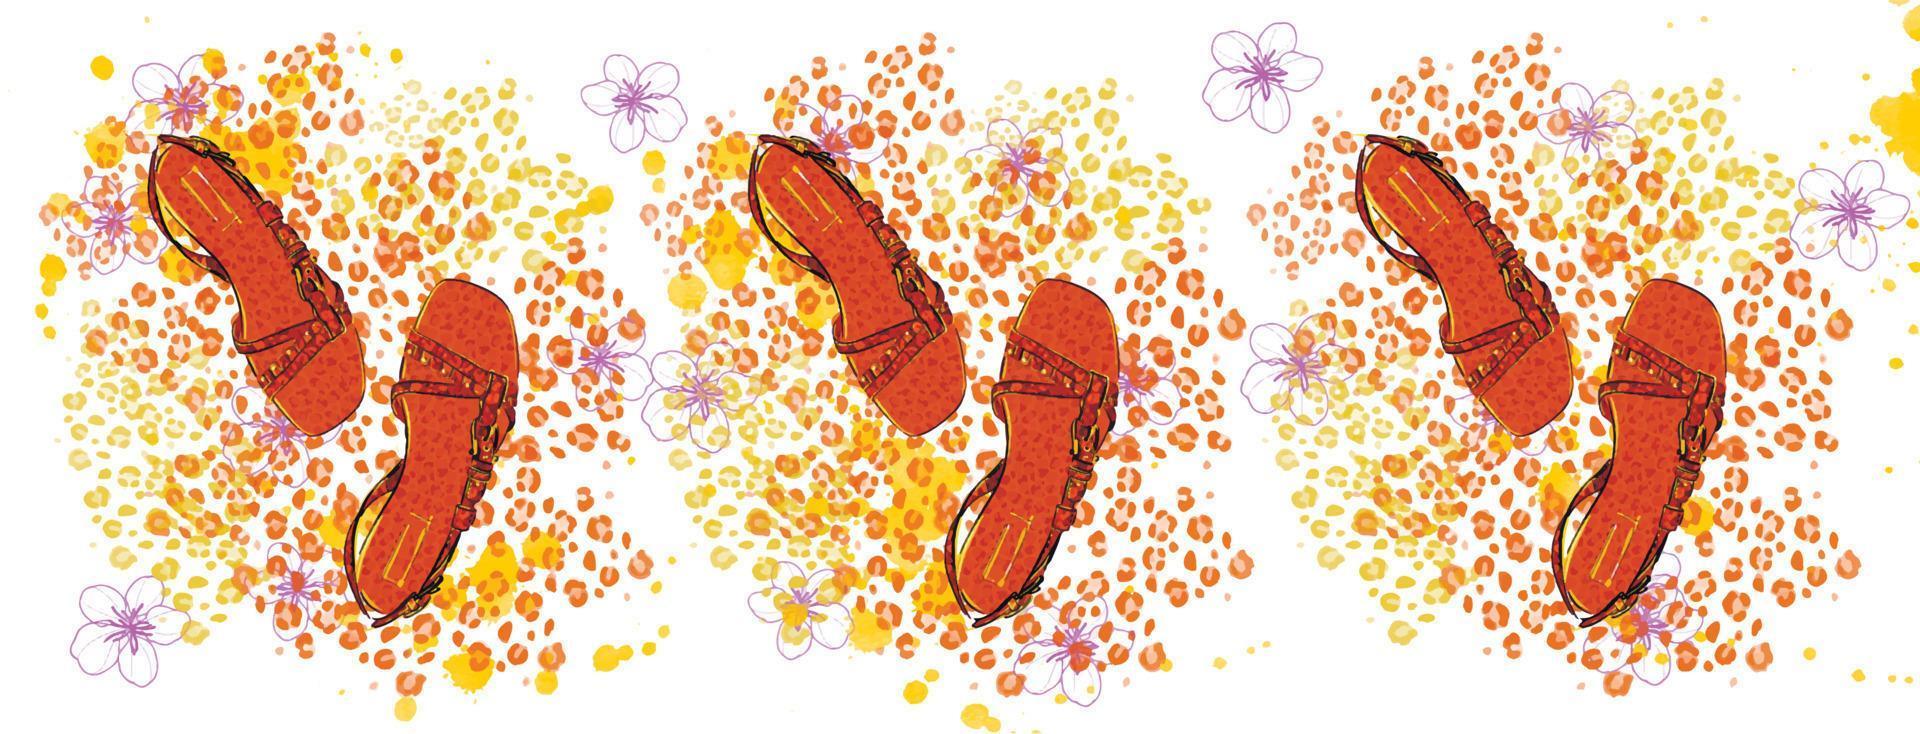 Fashion shoes pattern. Vector illustration.